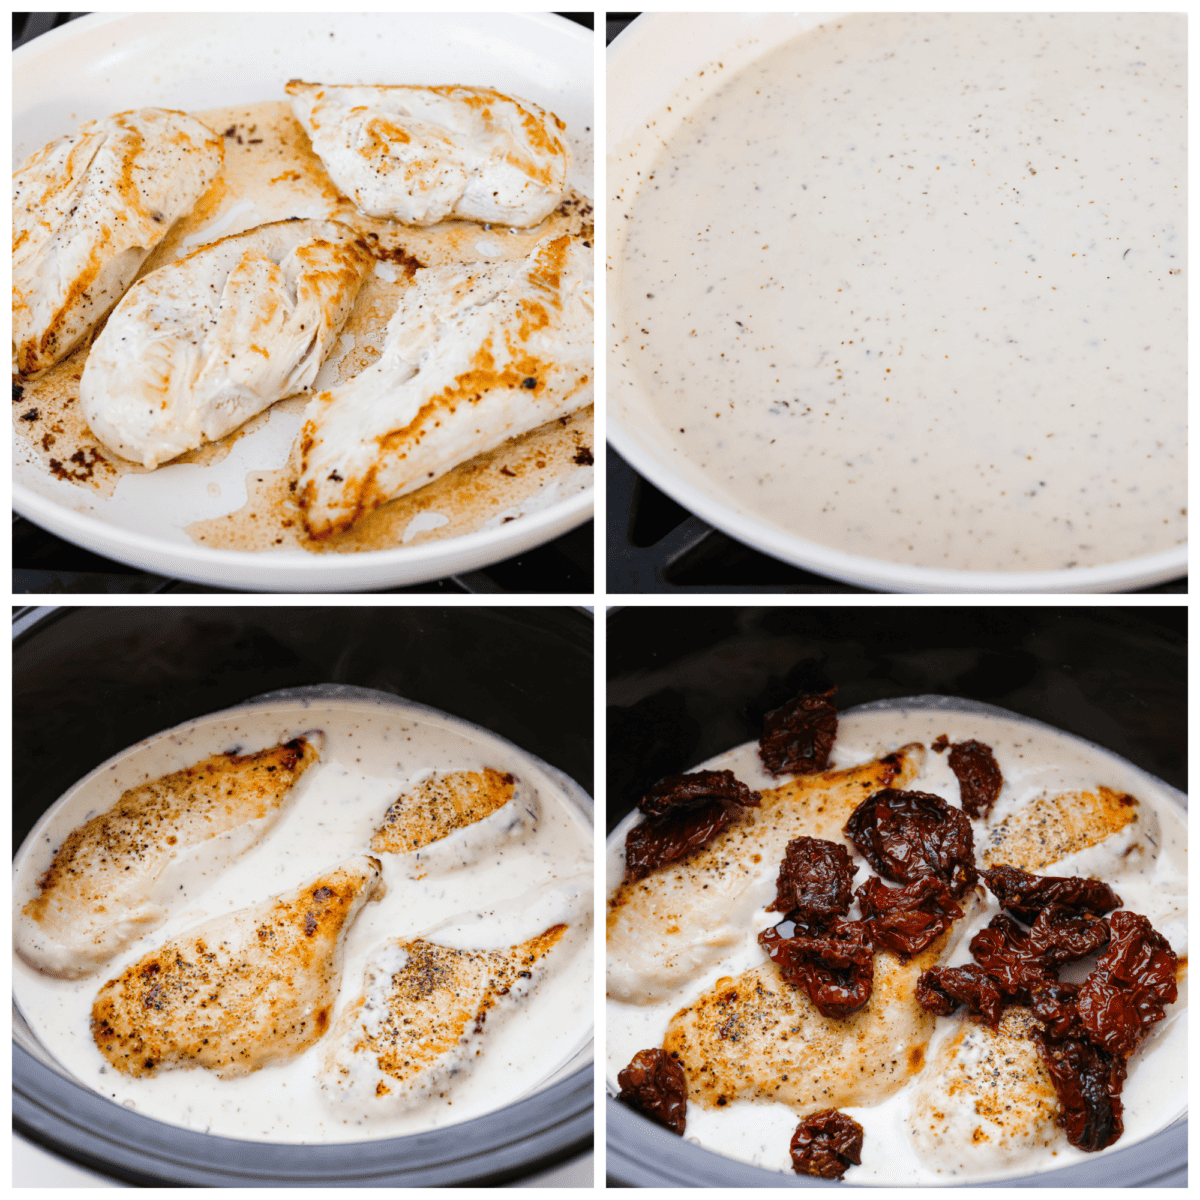 4-photo collage of the chicken being seared and then covered in a creamy sun-dried tomato sauce.